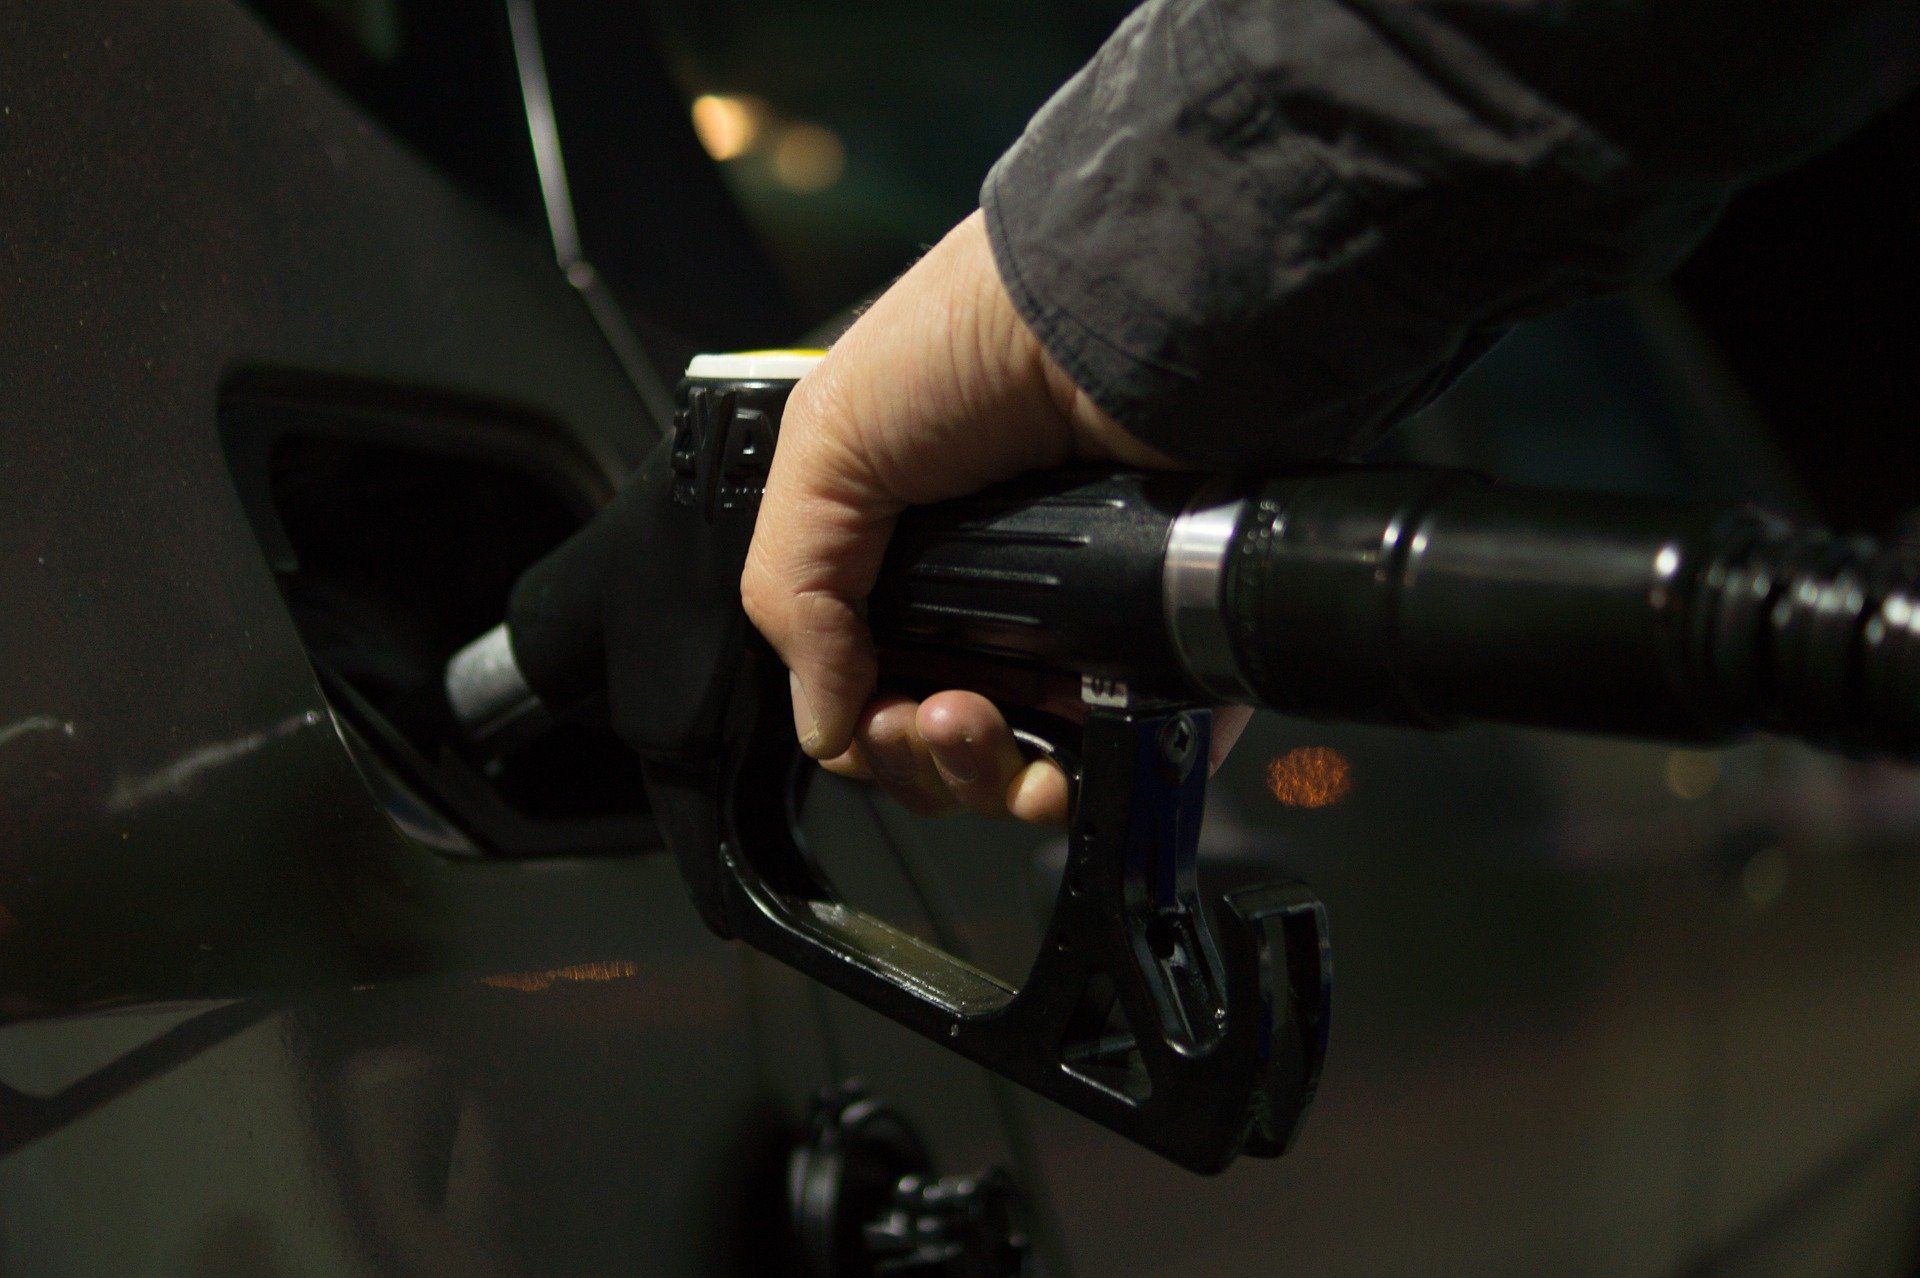 Fuel price today: Petrol and Diesel rates remain unchanged on May 20, 2022